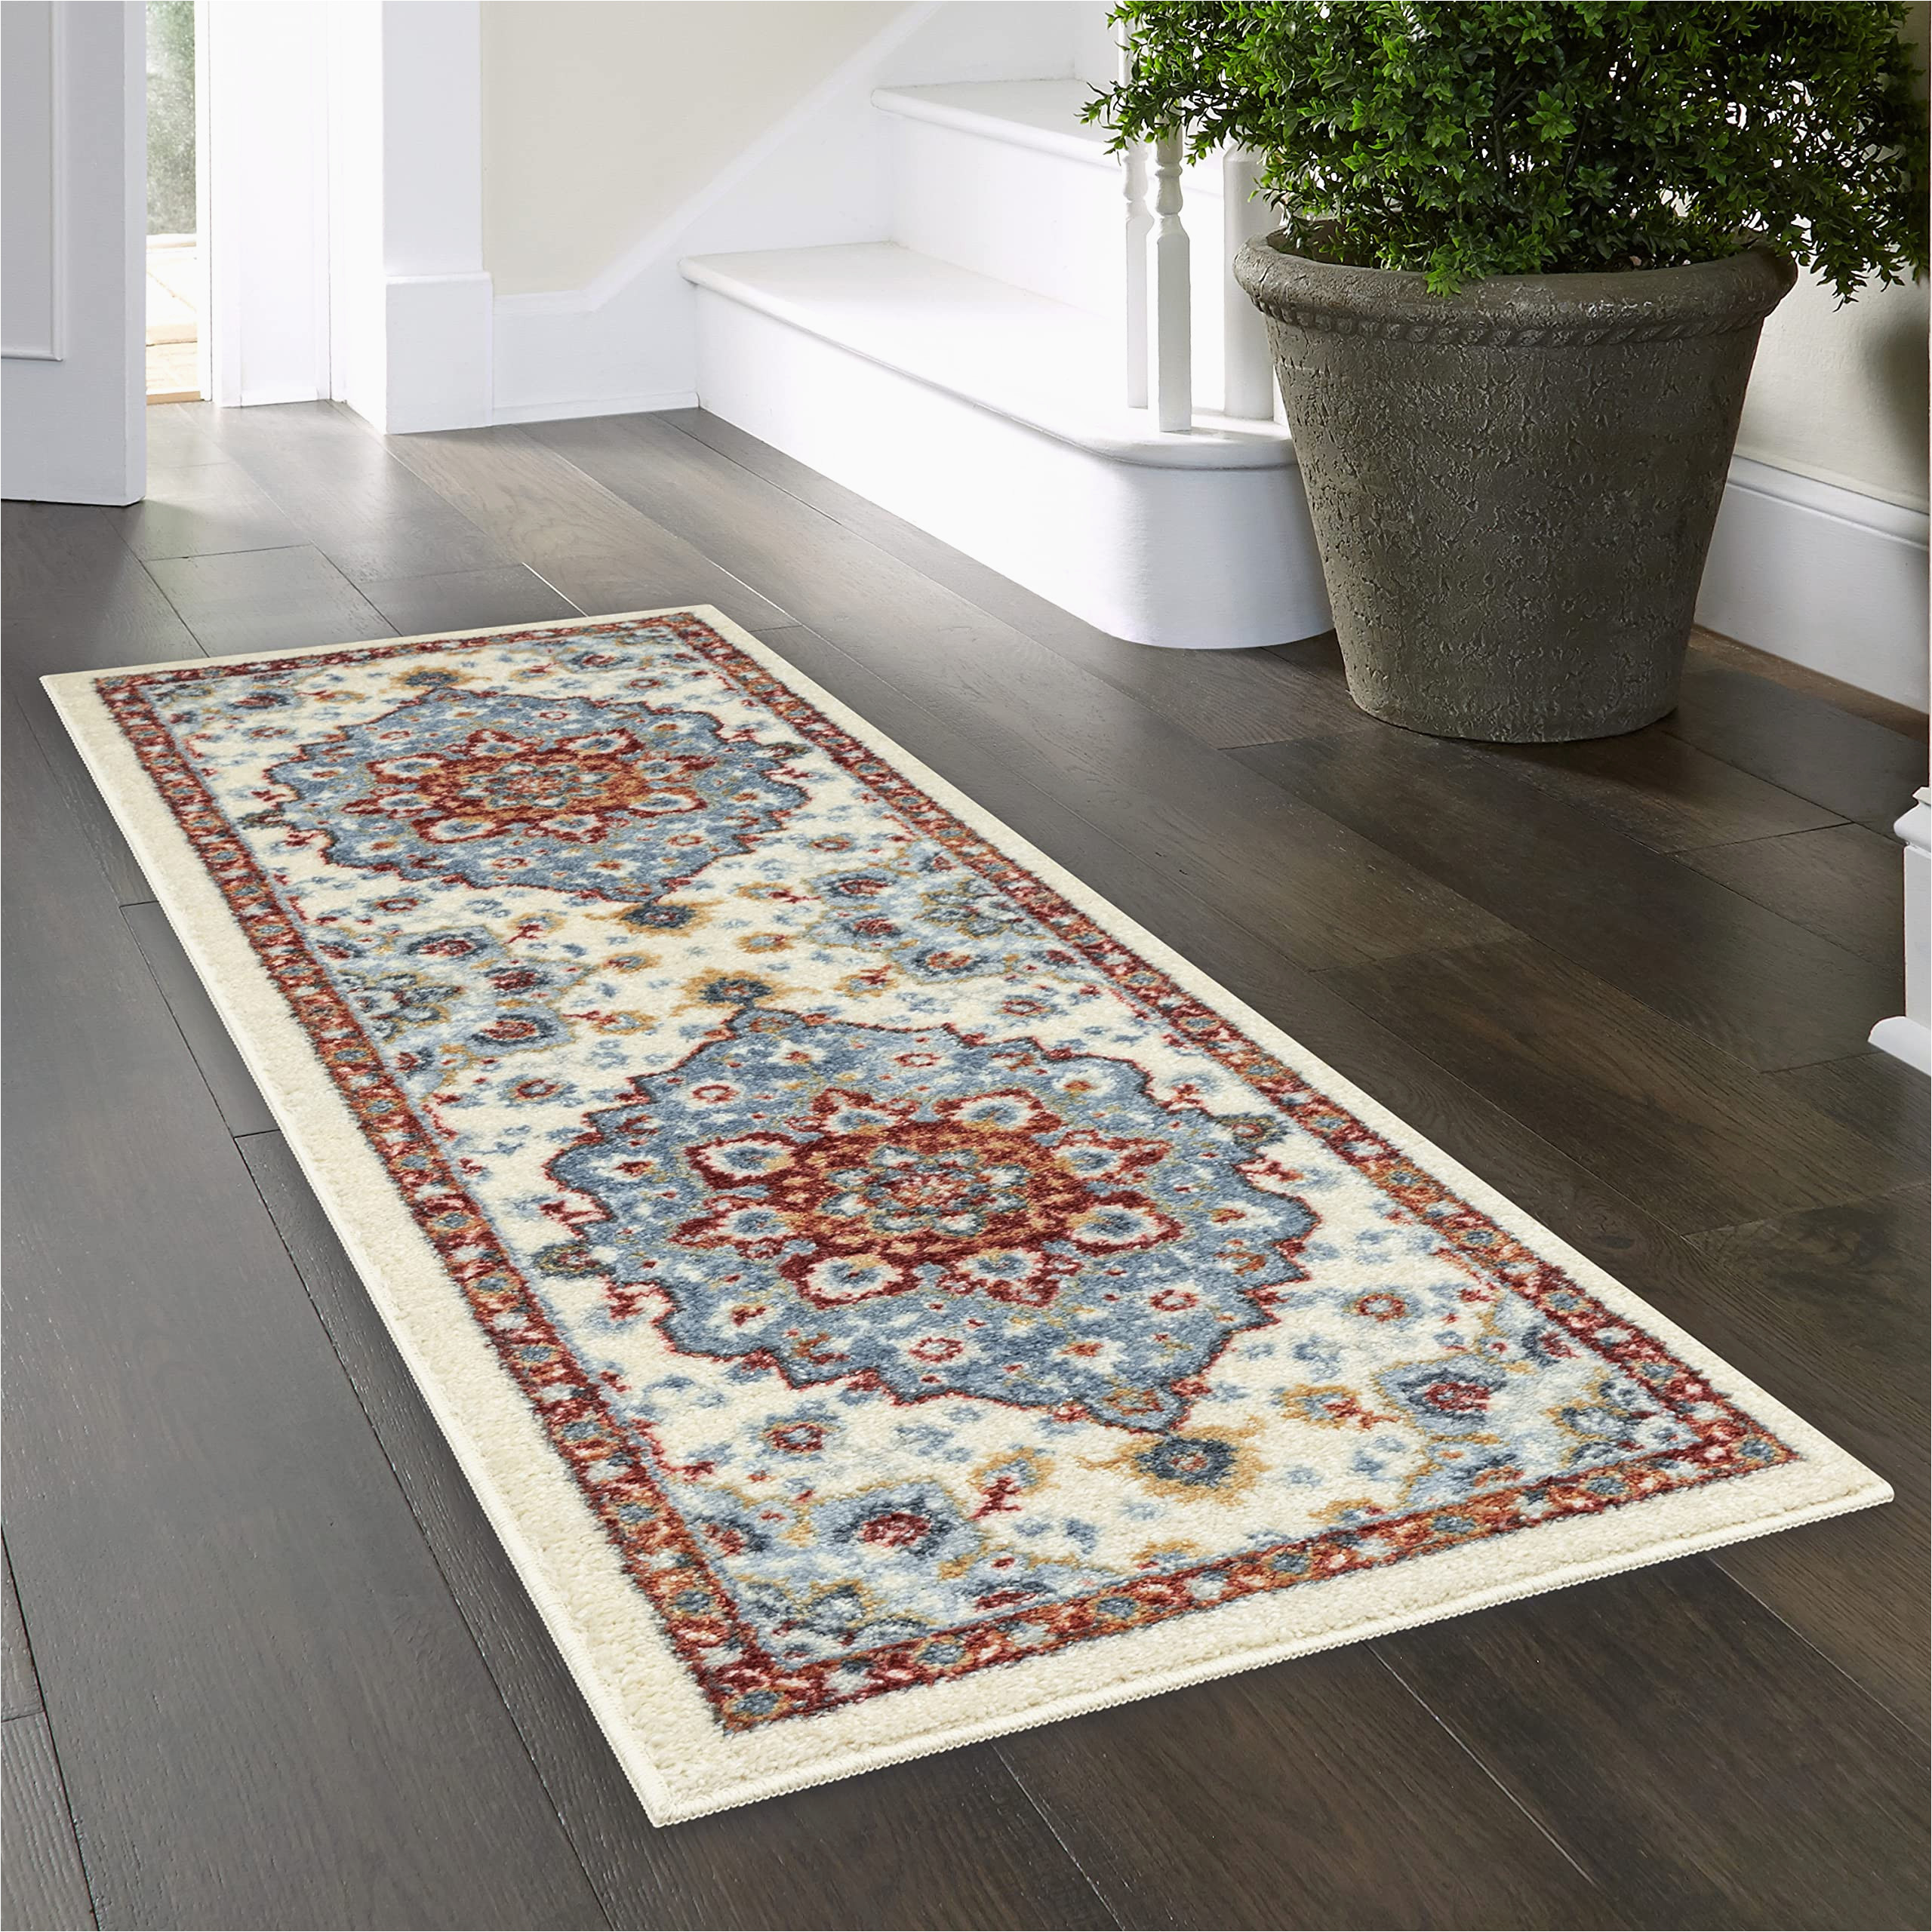 Maples Rugs Medallion area Rug Maples Rugs Stina Vintage Medallion Hallway Entryway Runner Non Skid Runner Rug [made In Usa], Blue/red, 2′ X 6′